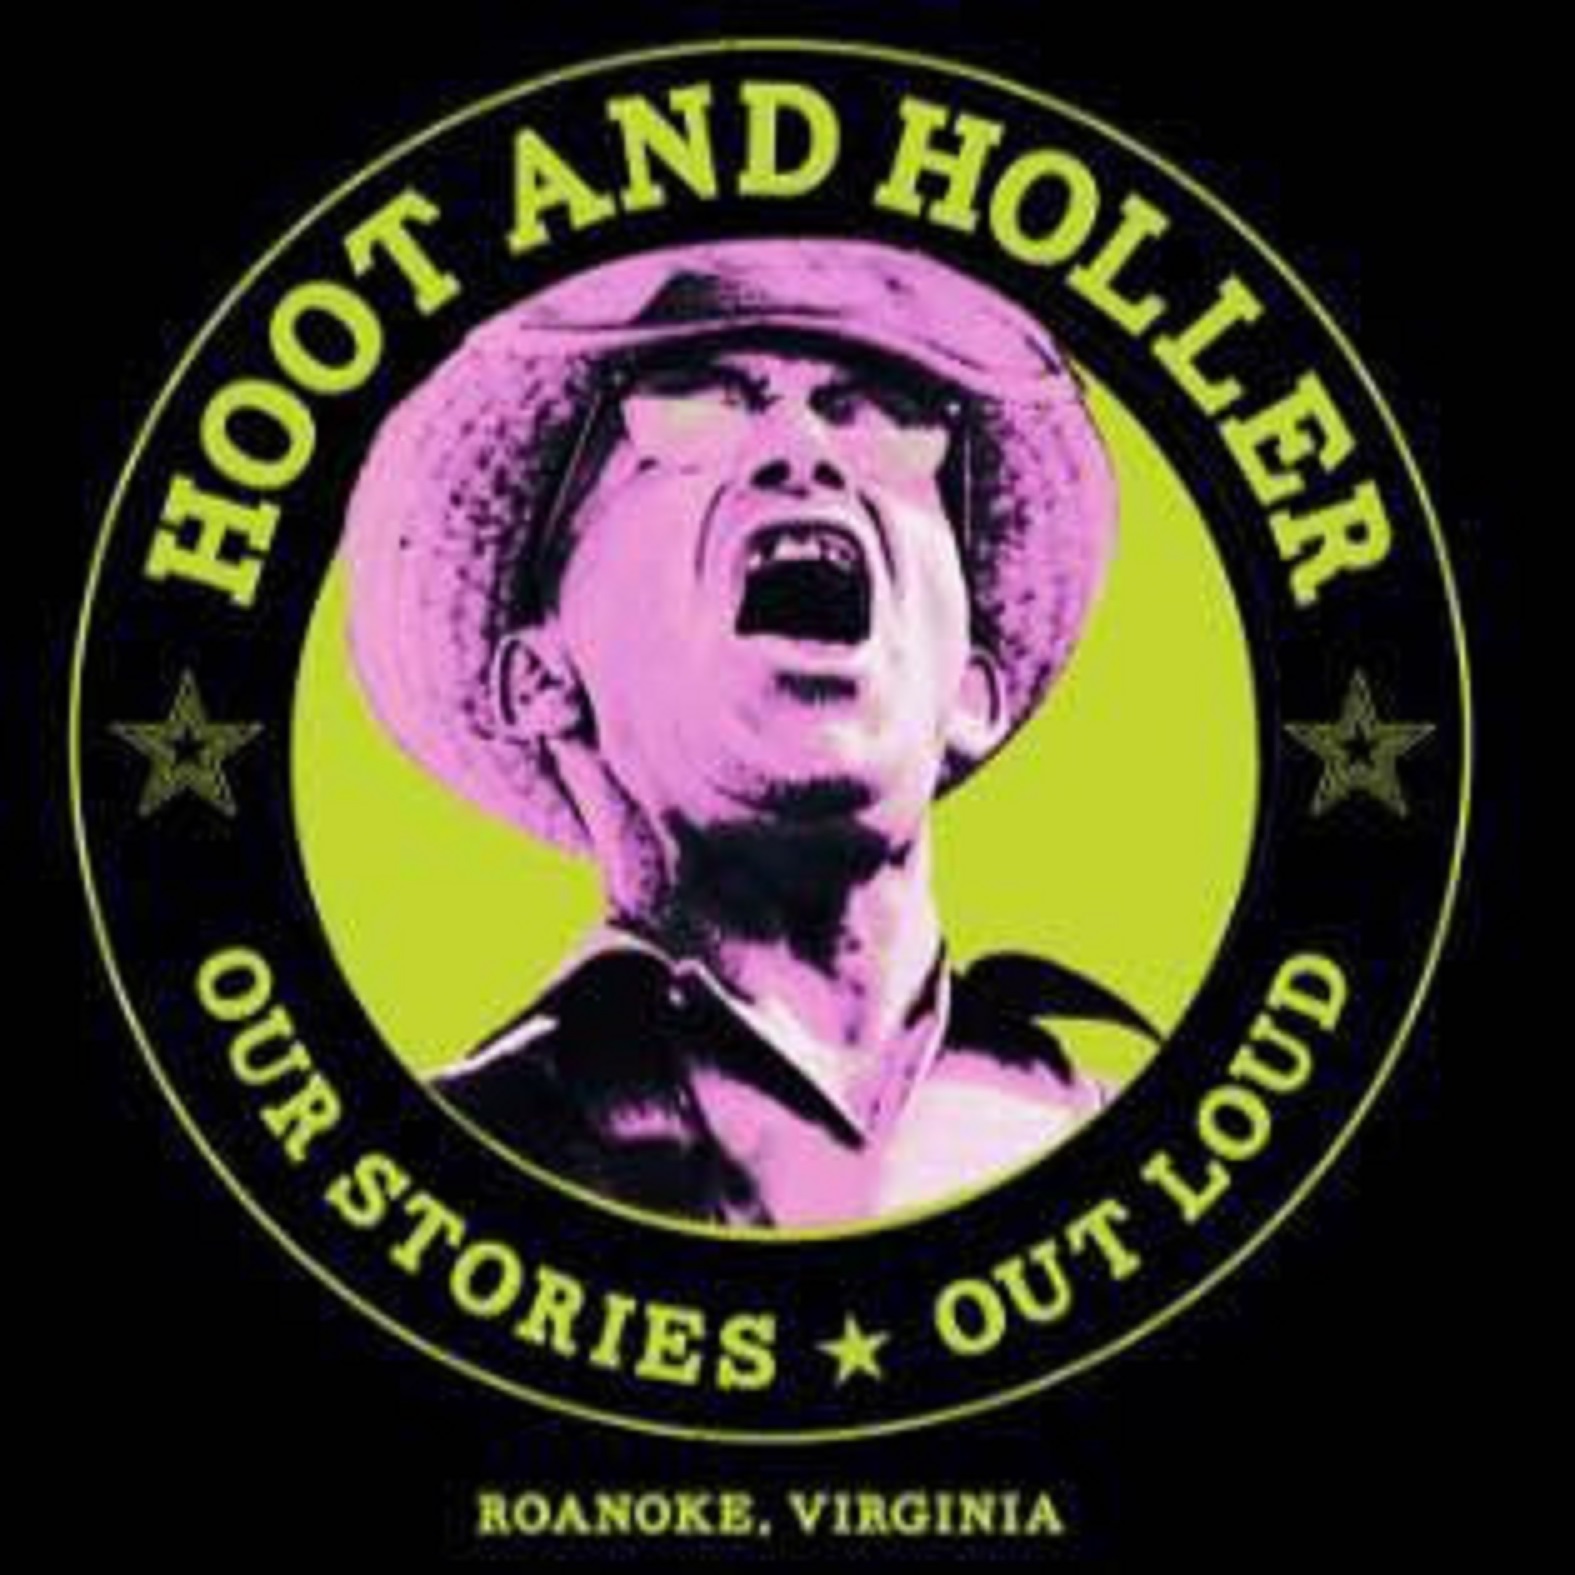 Hoot and Holler Returns to Bristol Nov. 16 Roanoke's Storytelling Collective at the Birthplace of Country Music Museum